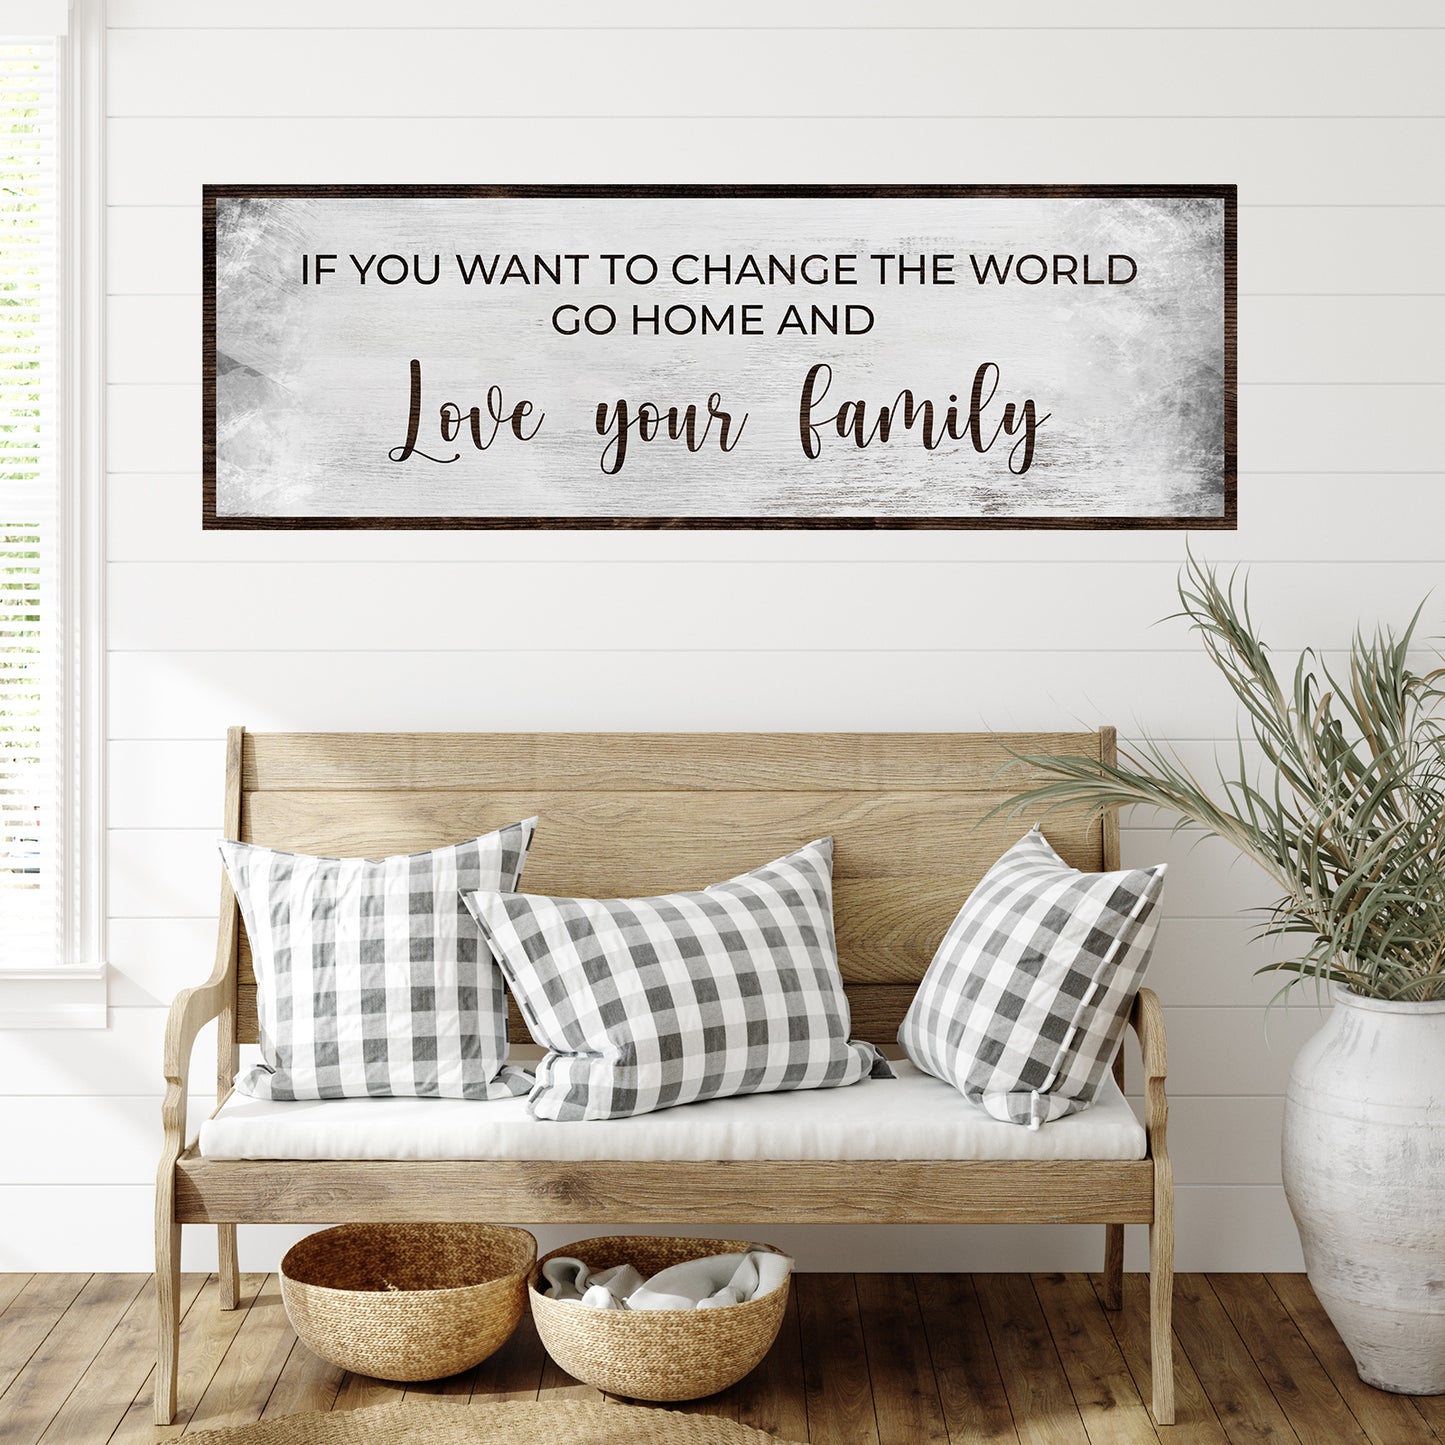 Go home and Love your Family Sign III - Image by Tailored Canvases